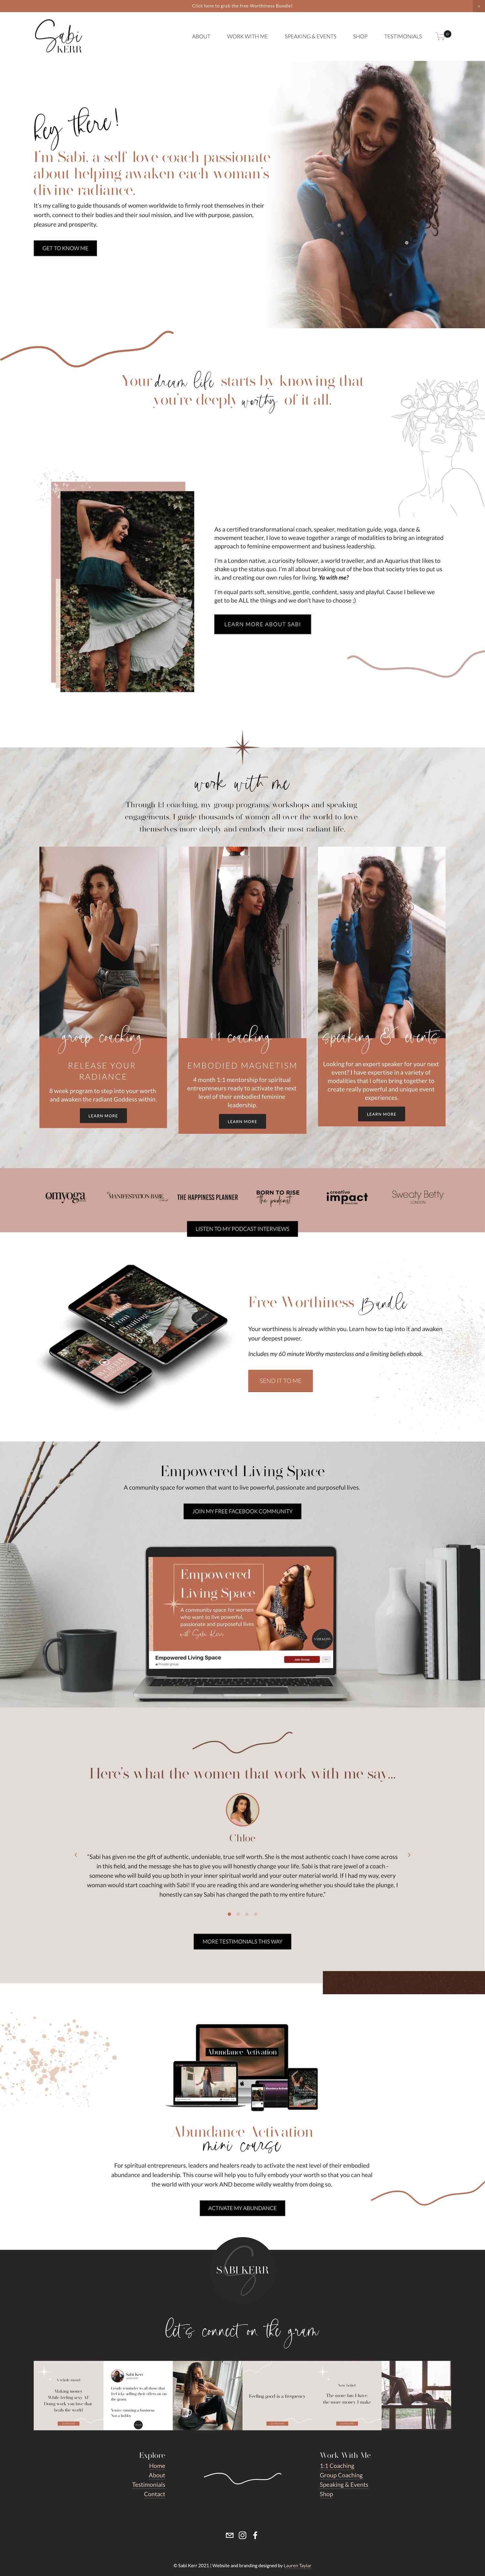 50 Squarespace websites and template design examples — Paige Brunton ...